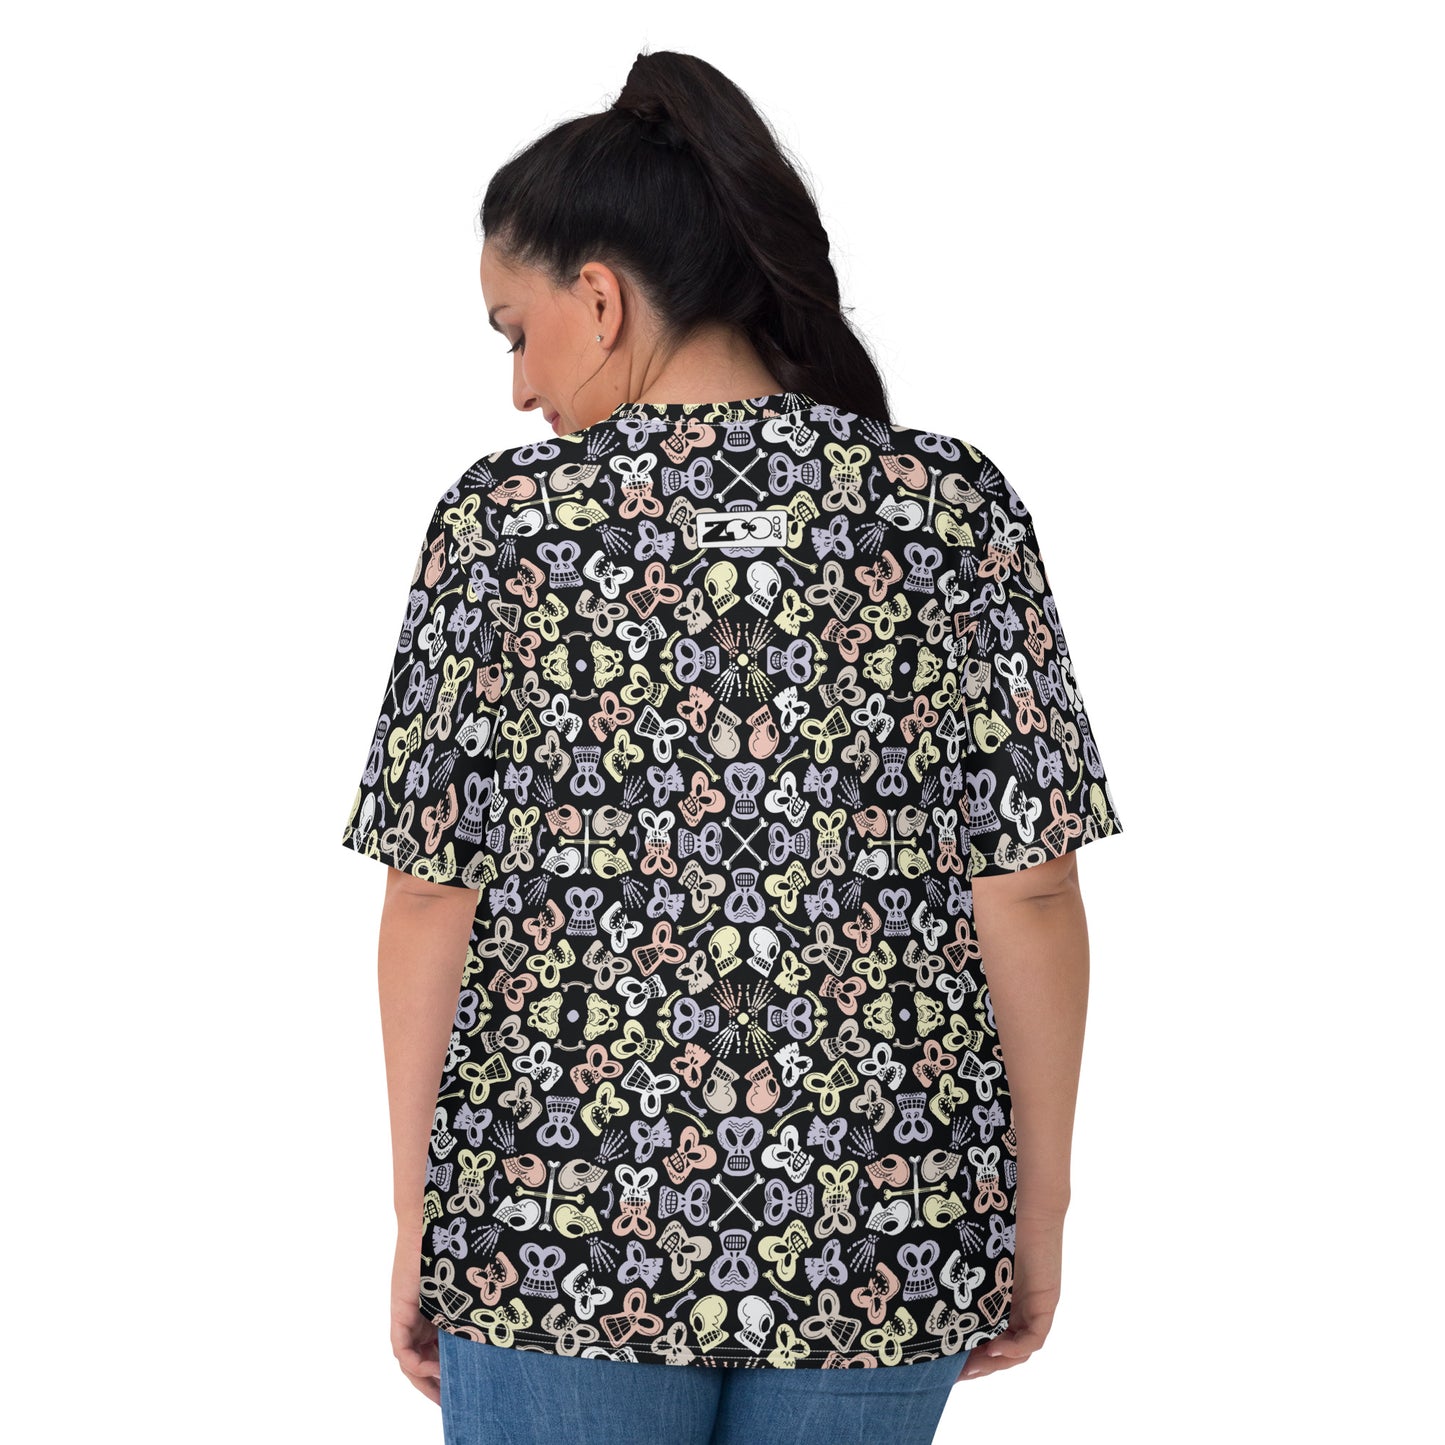 Bewitched Skulls: Hauntingly Chic Pattern Design - Women's T-shirt